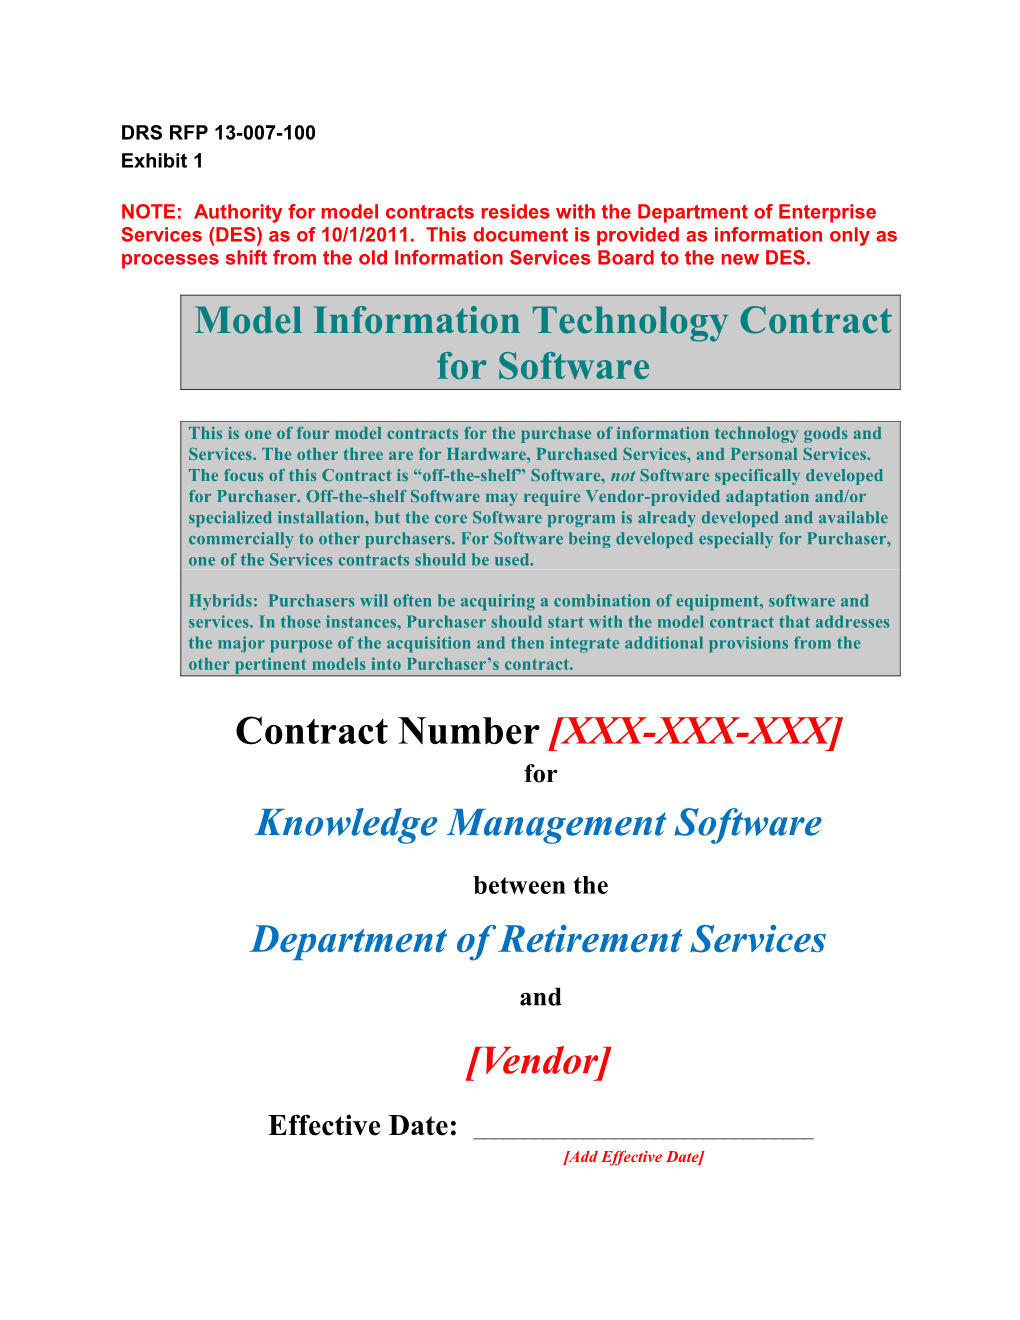 Model Information Technology Contract For Software